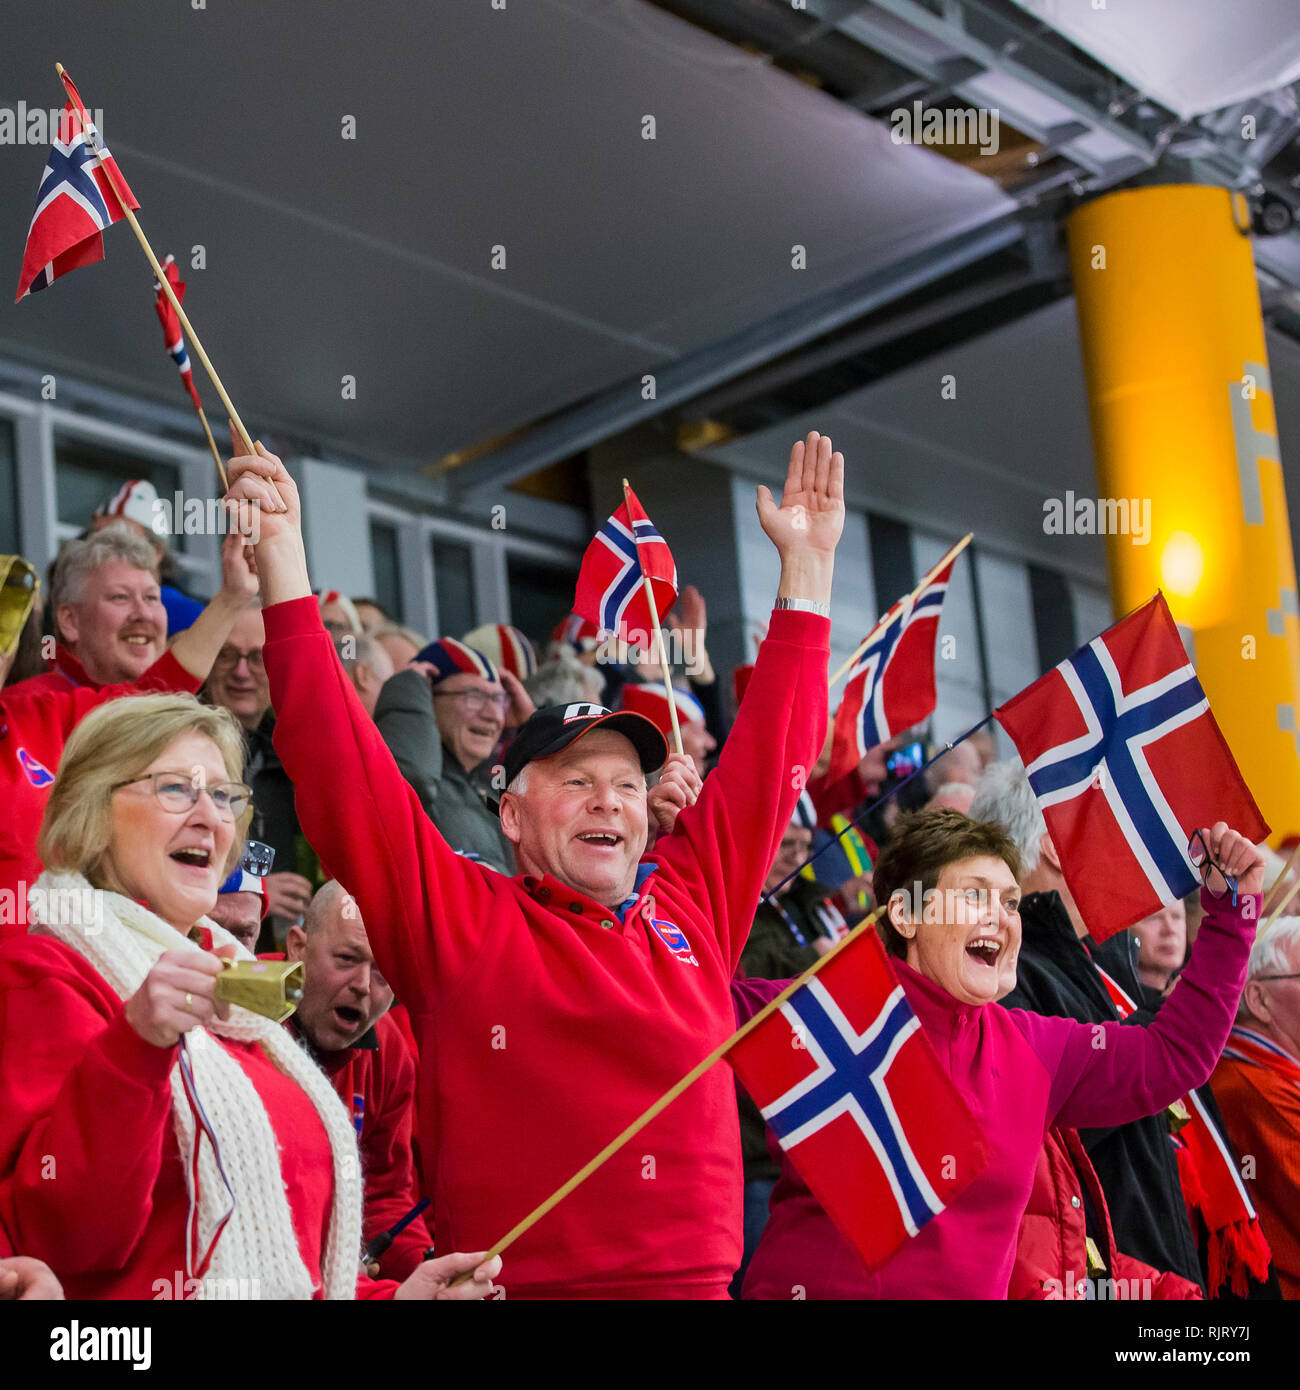 INZELL, Max Aicher Arena, 07-02-2019 , season 2018 / 2019 , World Single Distances Speedskating Championships. Norwegian fans celebrating the victory  of Sverre Lunde Pedersen    during WC Single Distances 7 February Stock Photo